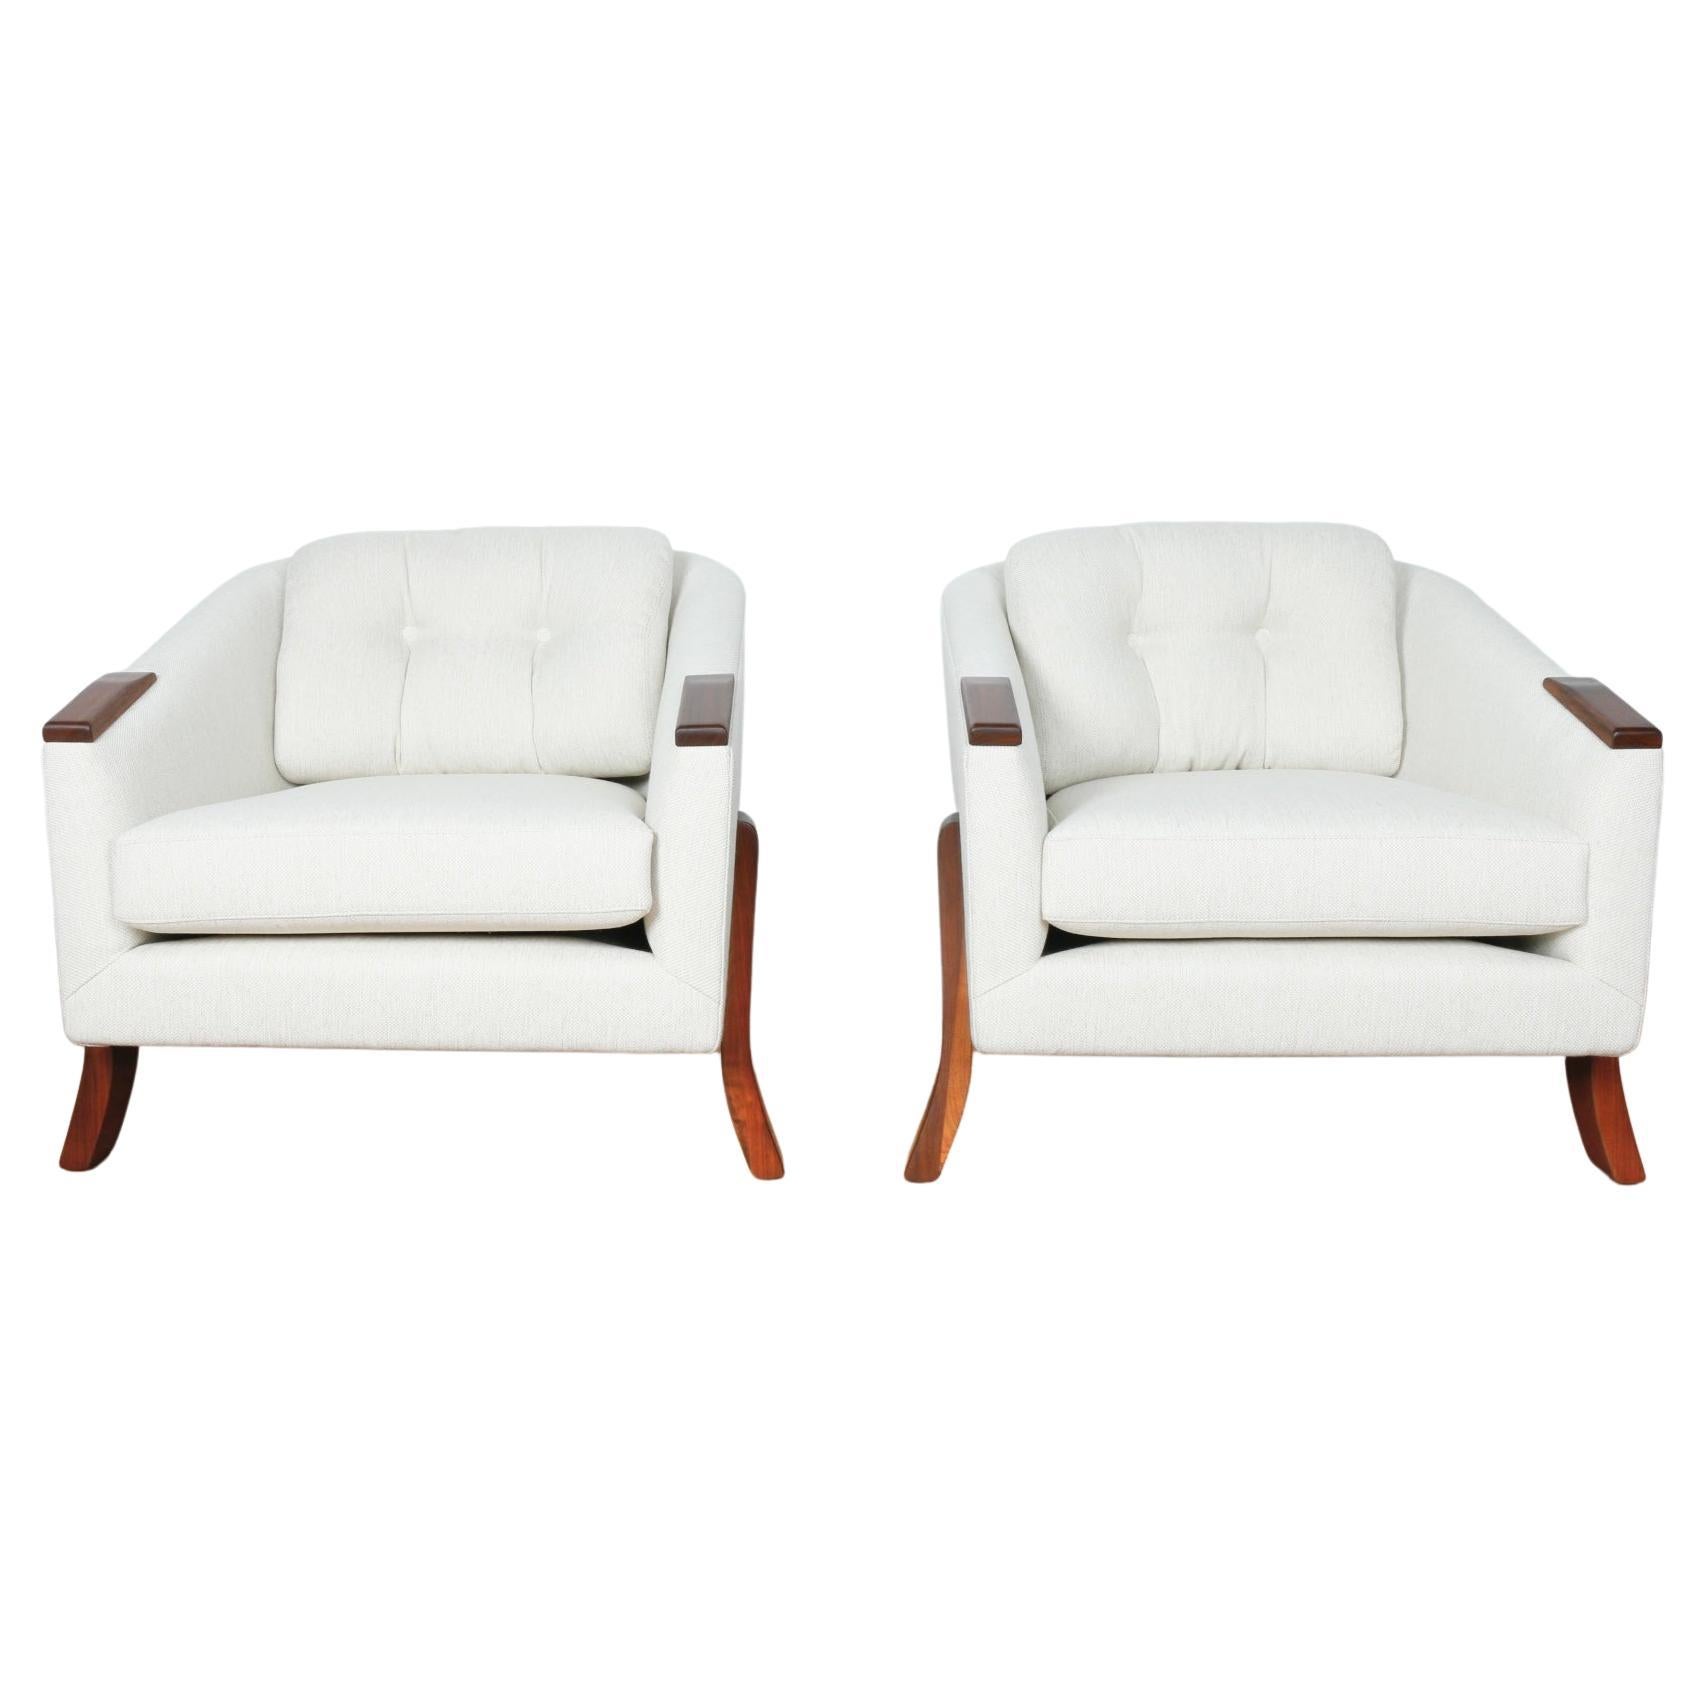 Adrian Pearsall Attributed Pair of Lounge Chairs